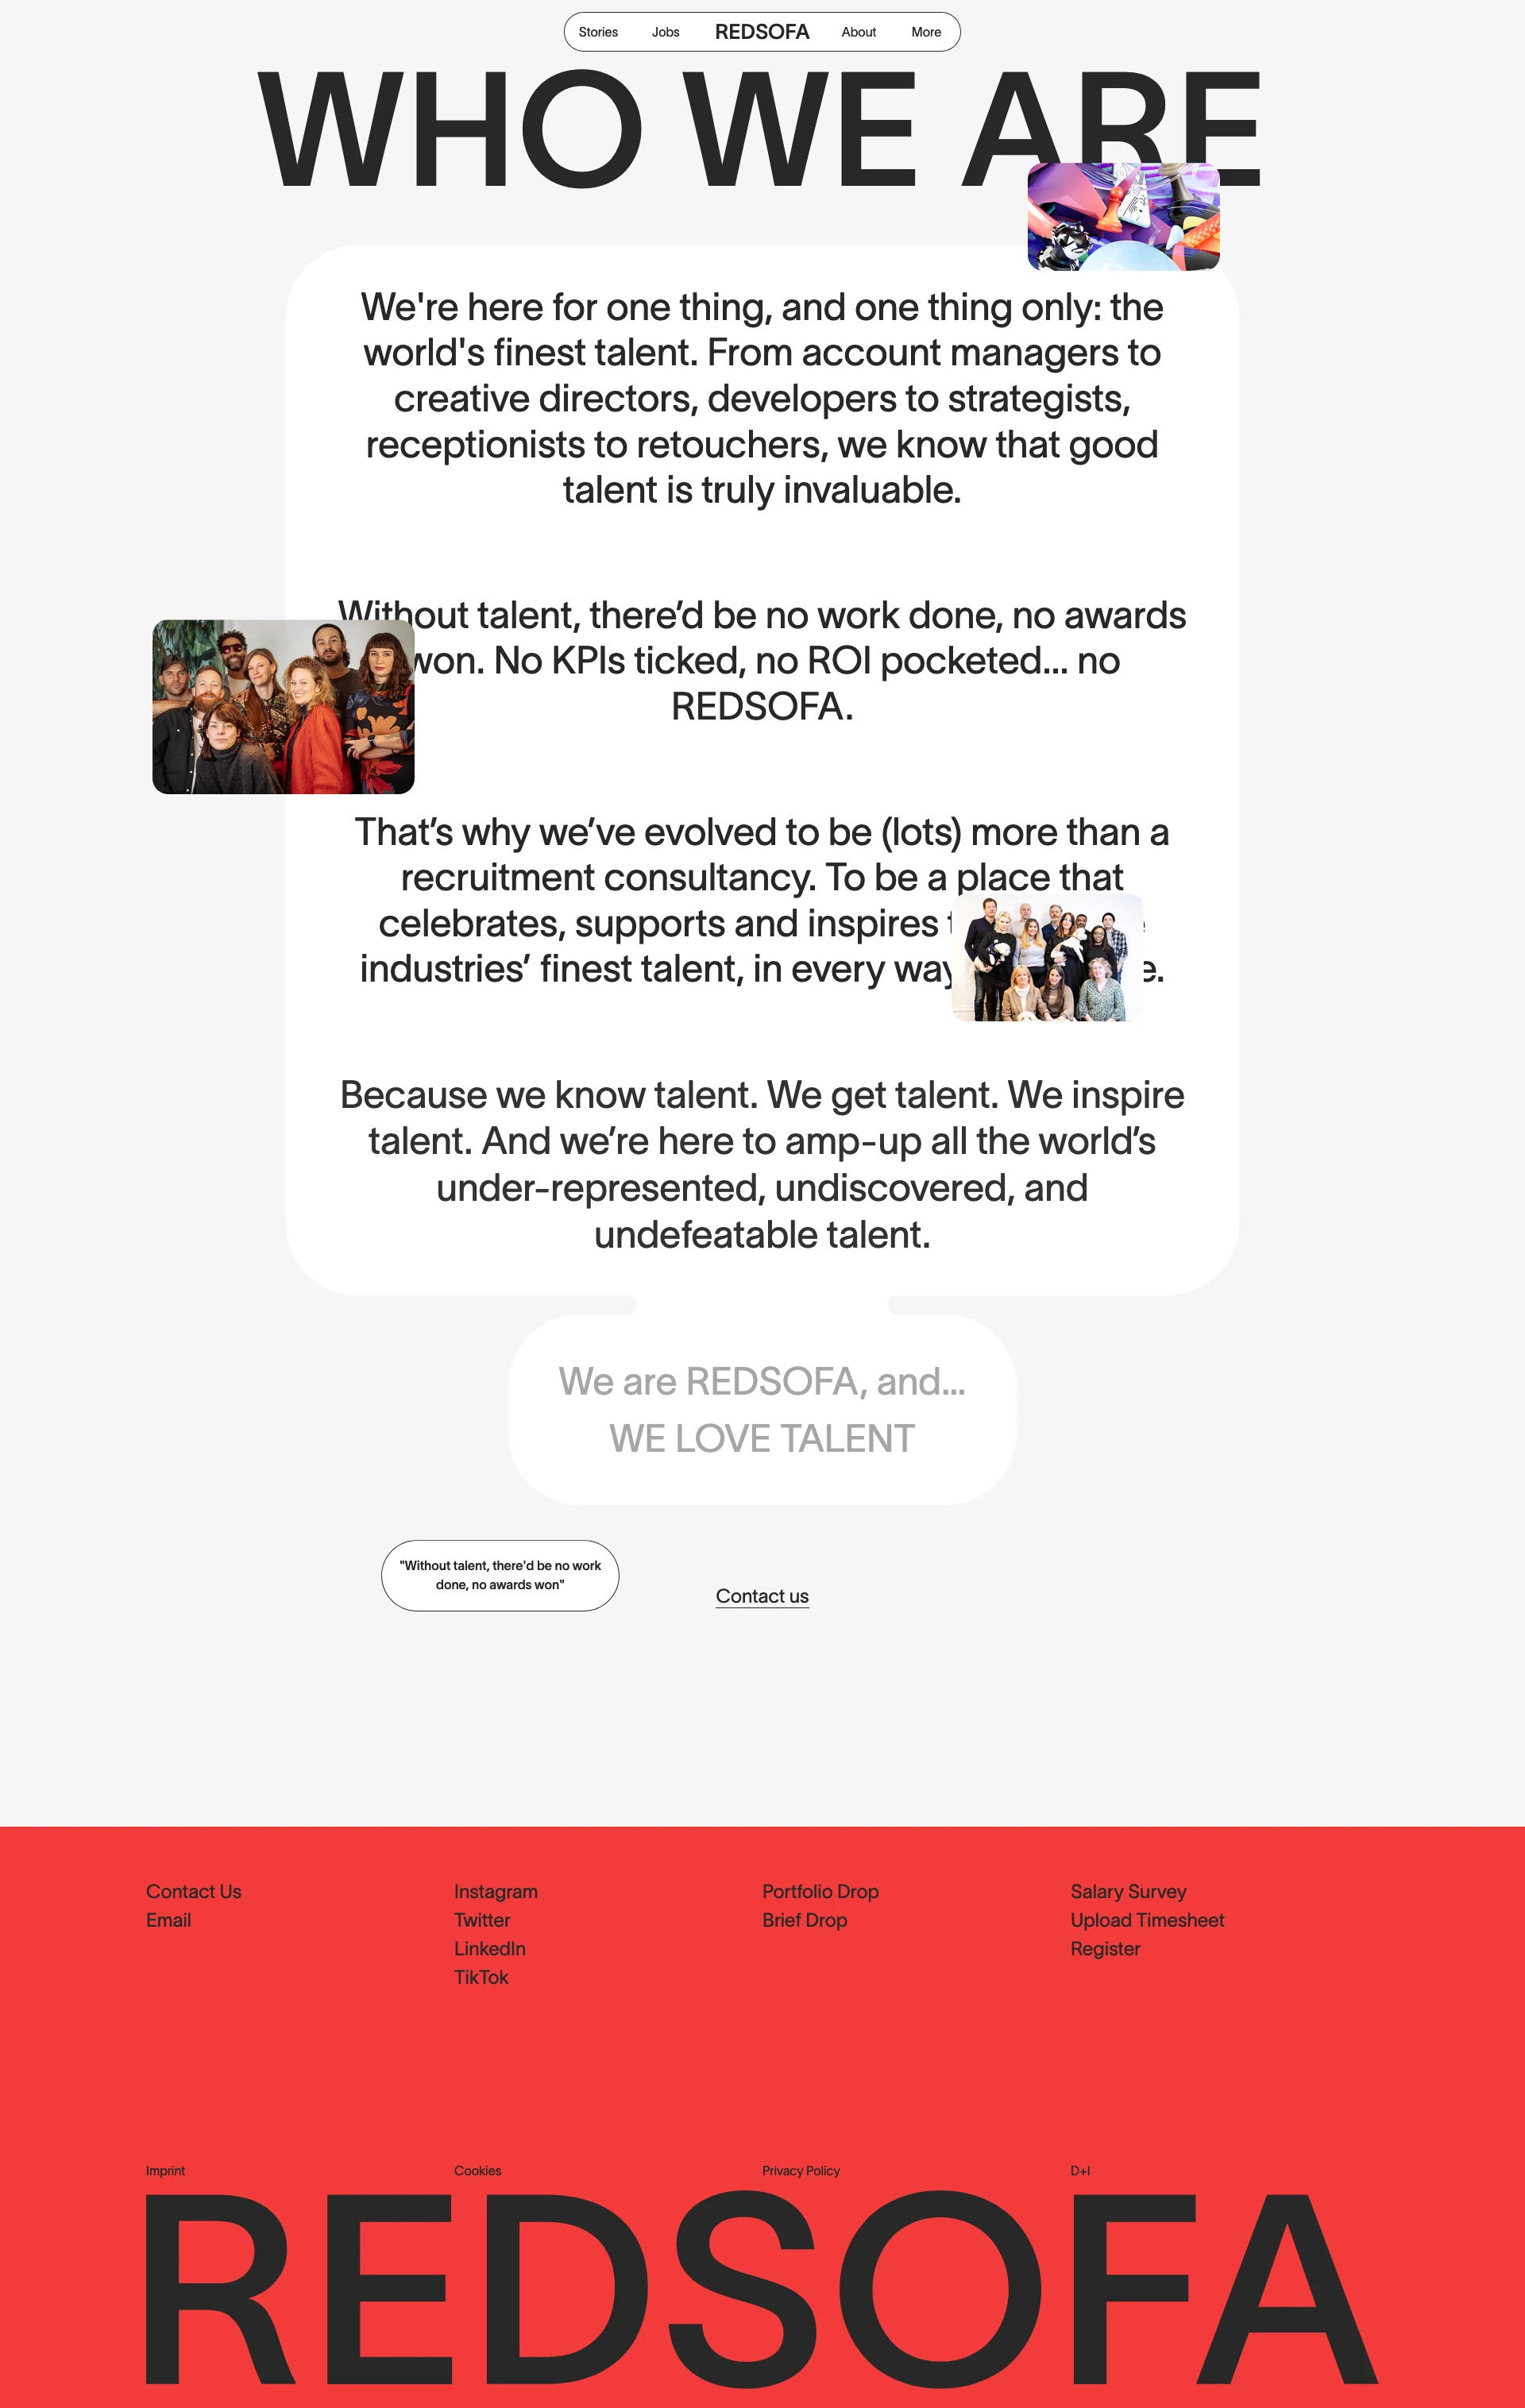 REDSOFA Landing Page Example: We are REDSOFA, the world's first “Recruitment+” brand. From finding candidates their best work to finding clients their greatest talent — we are here to help you with all of your recruitment and industry needs.